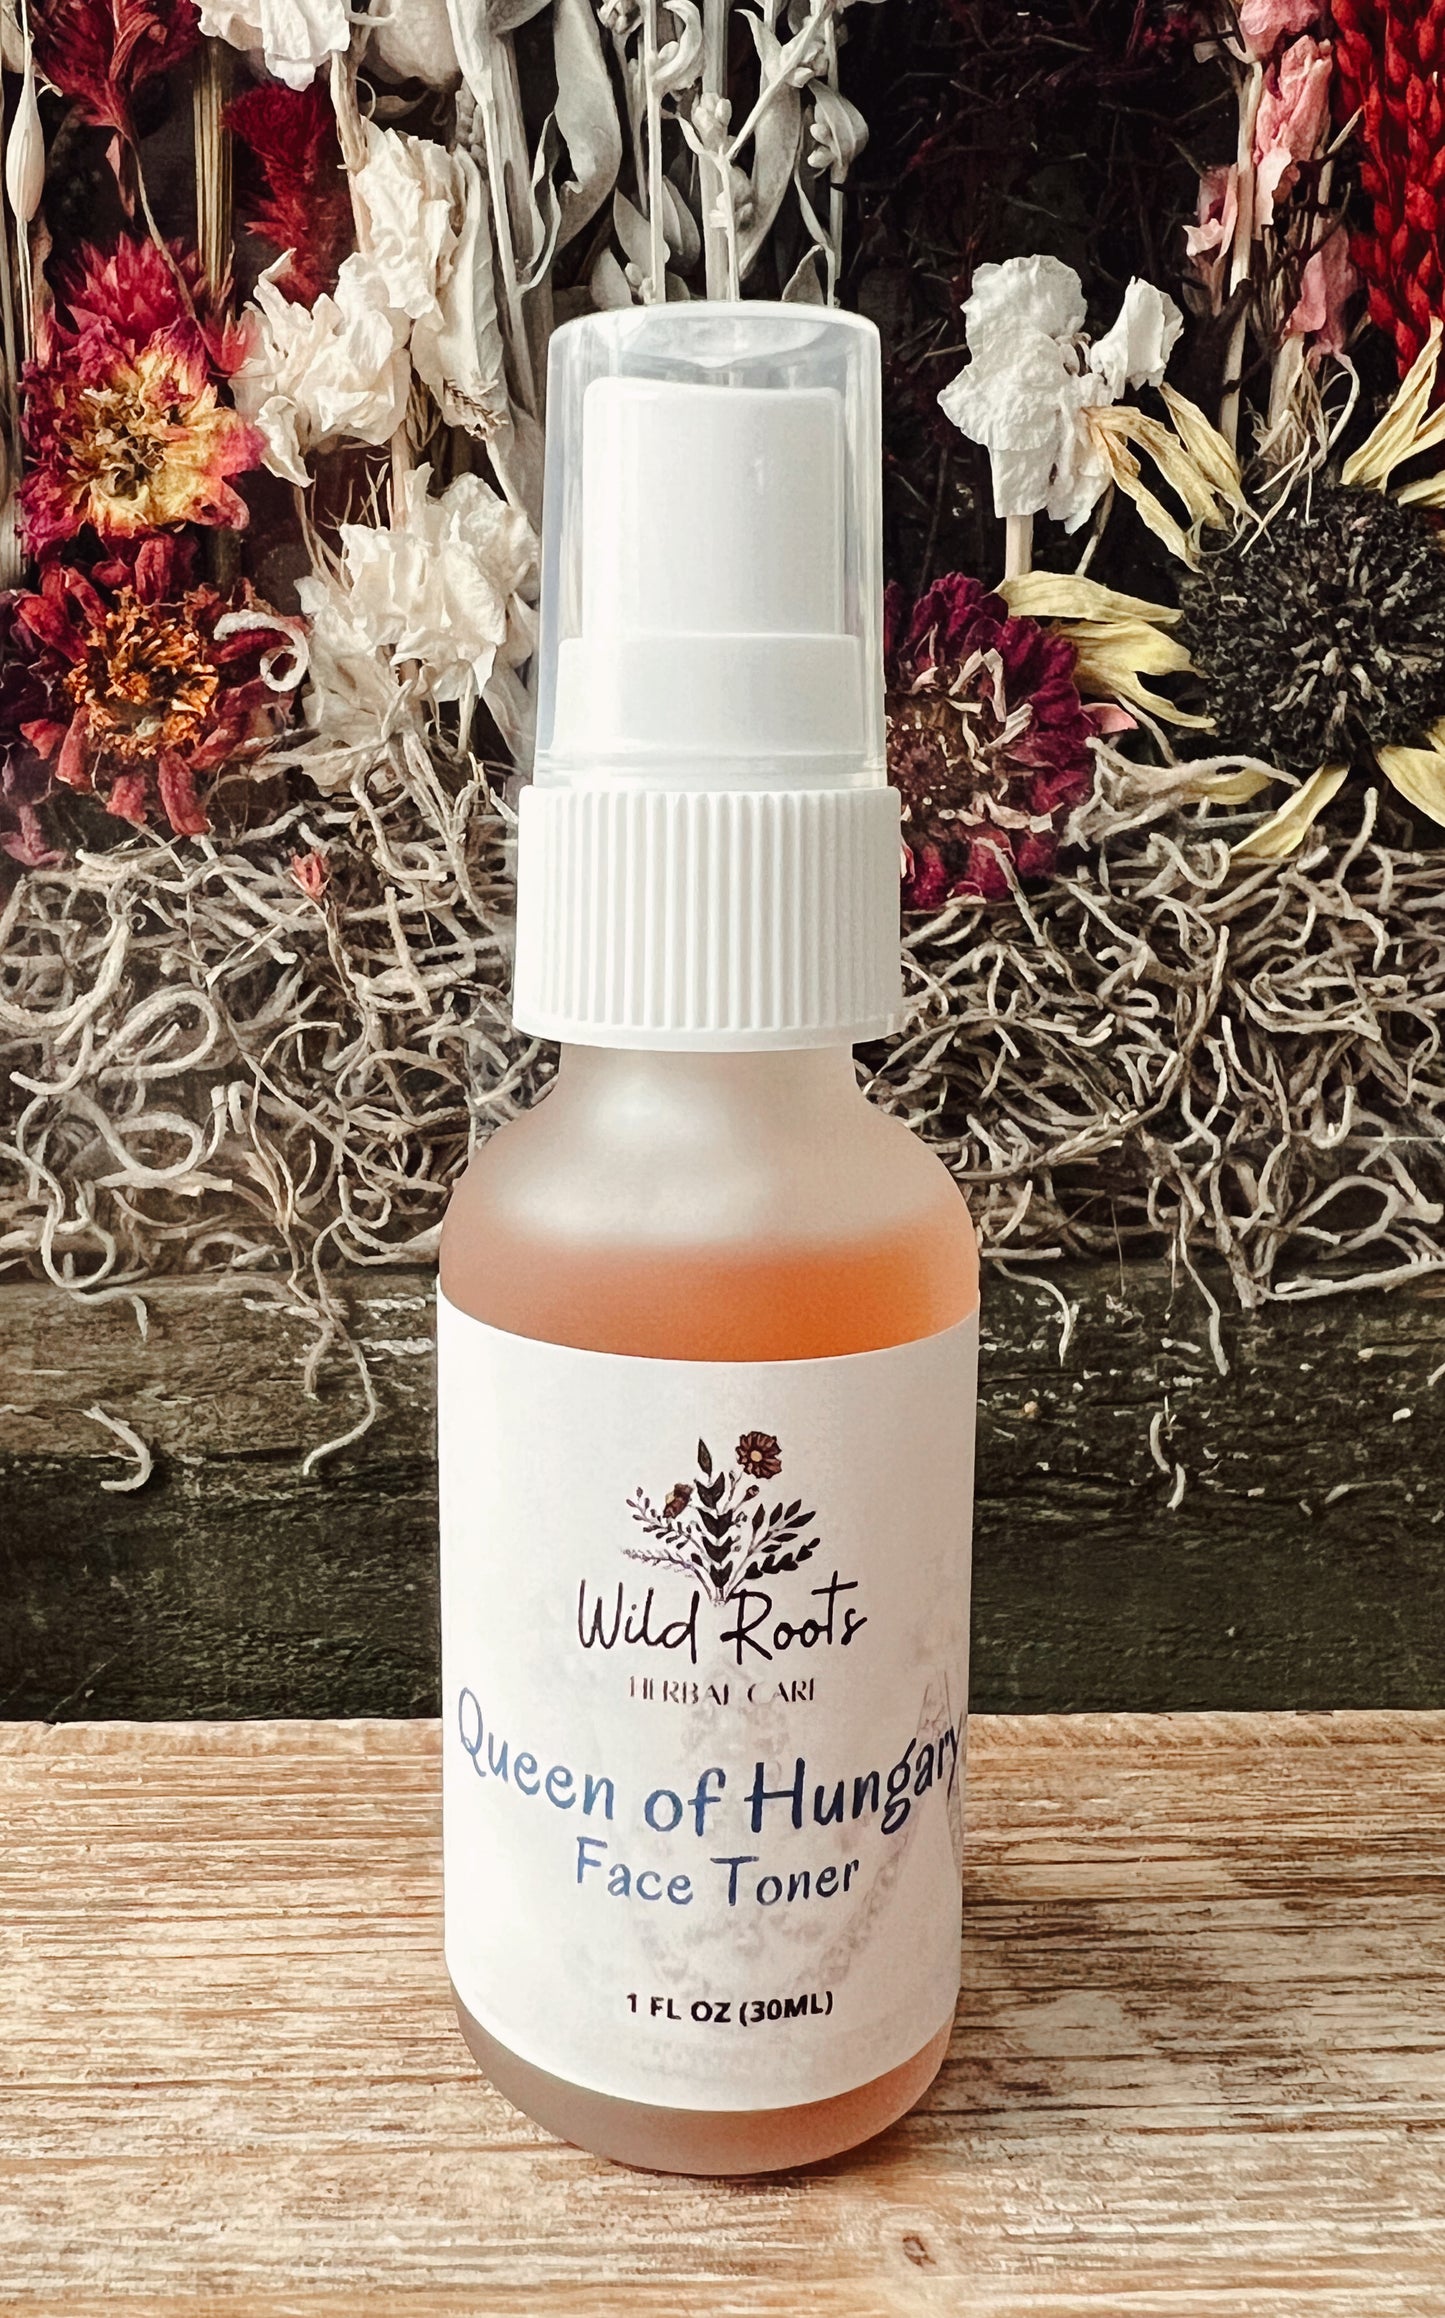 Queen of Hungary Face Toner